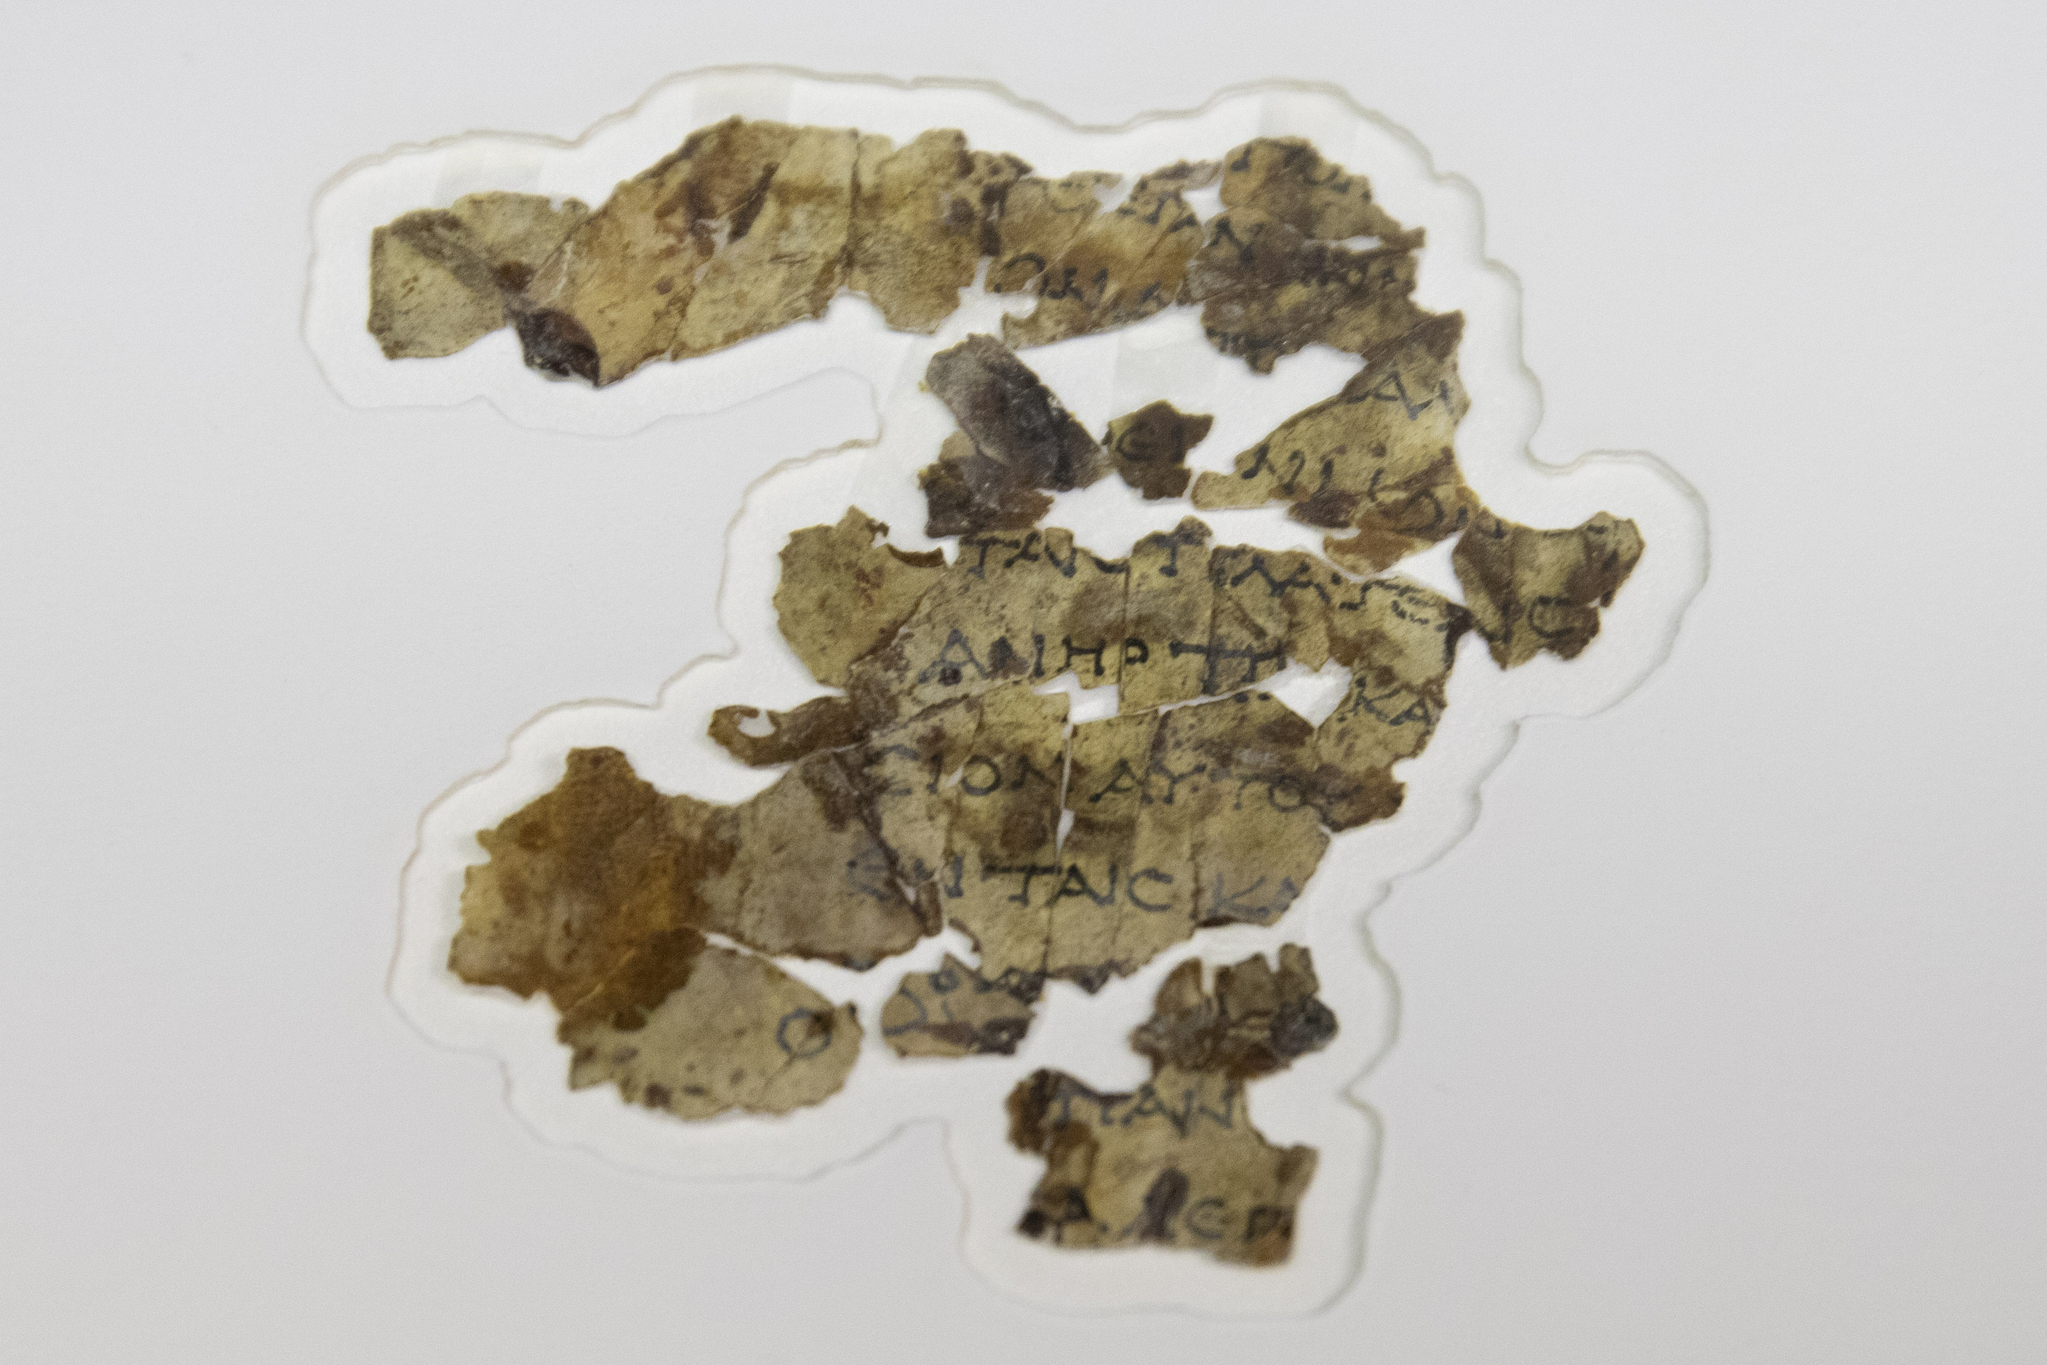 Fragments of a 1900-year-old Bible manuscript excavated in Israel’s Cave of Fear